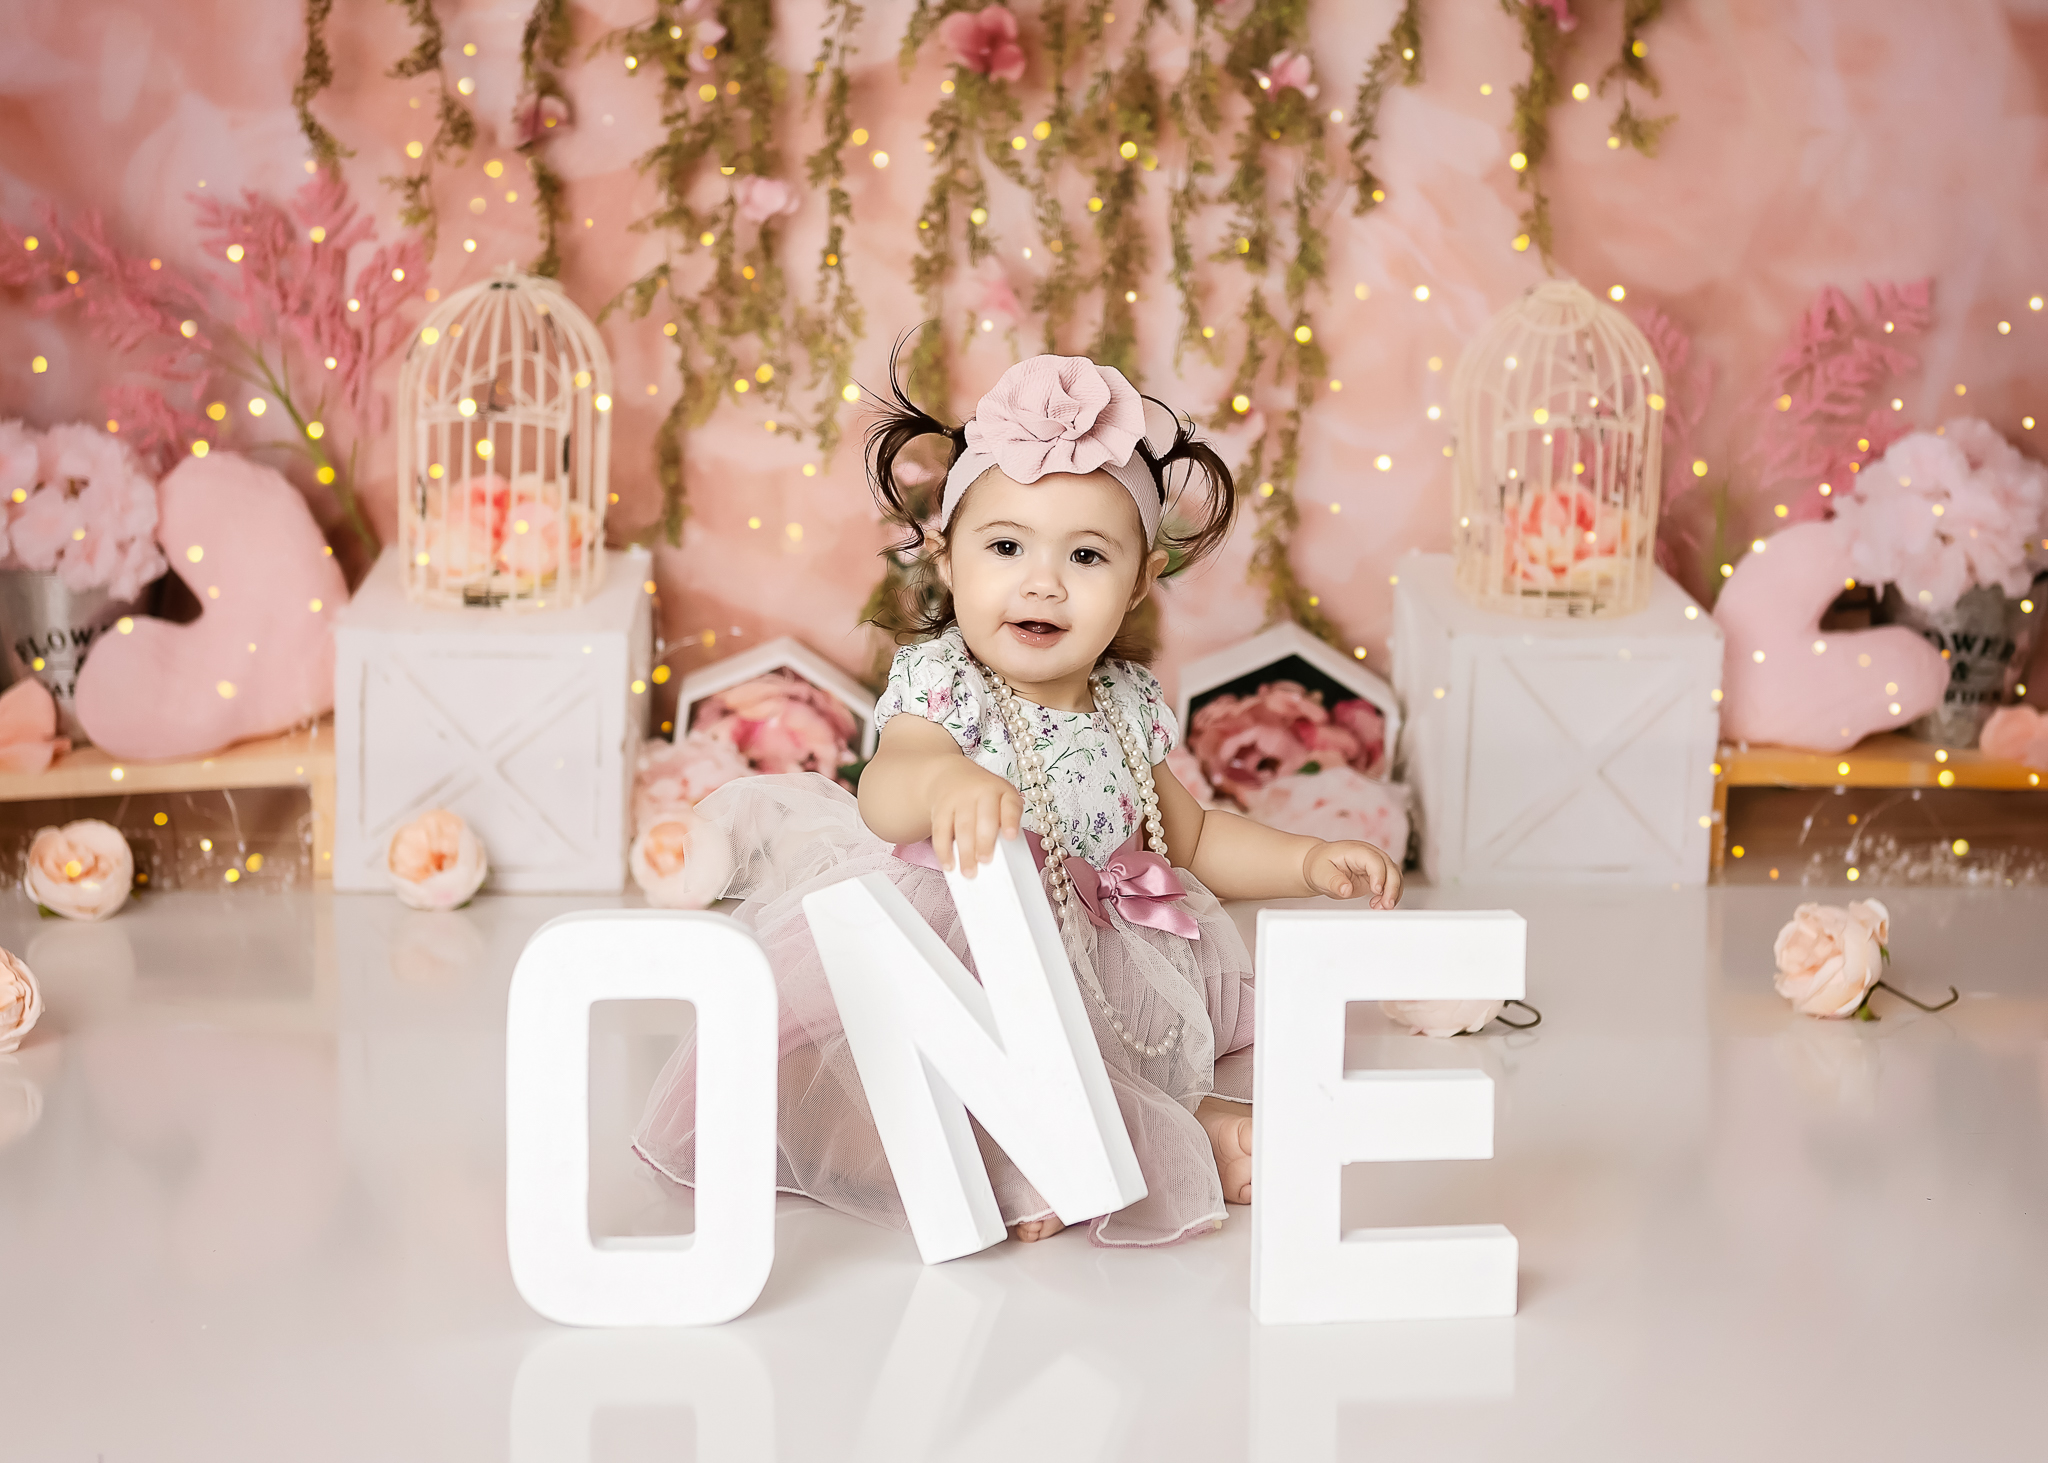 Sky – One year old session